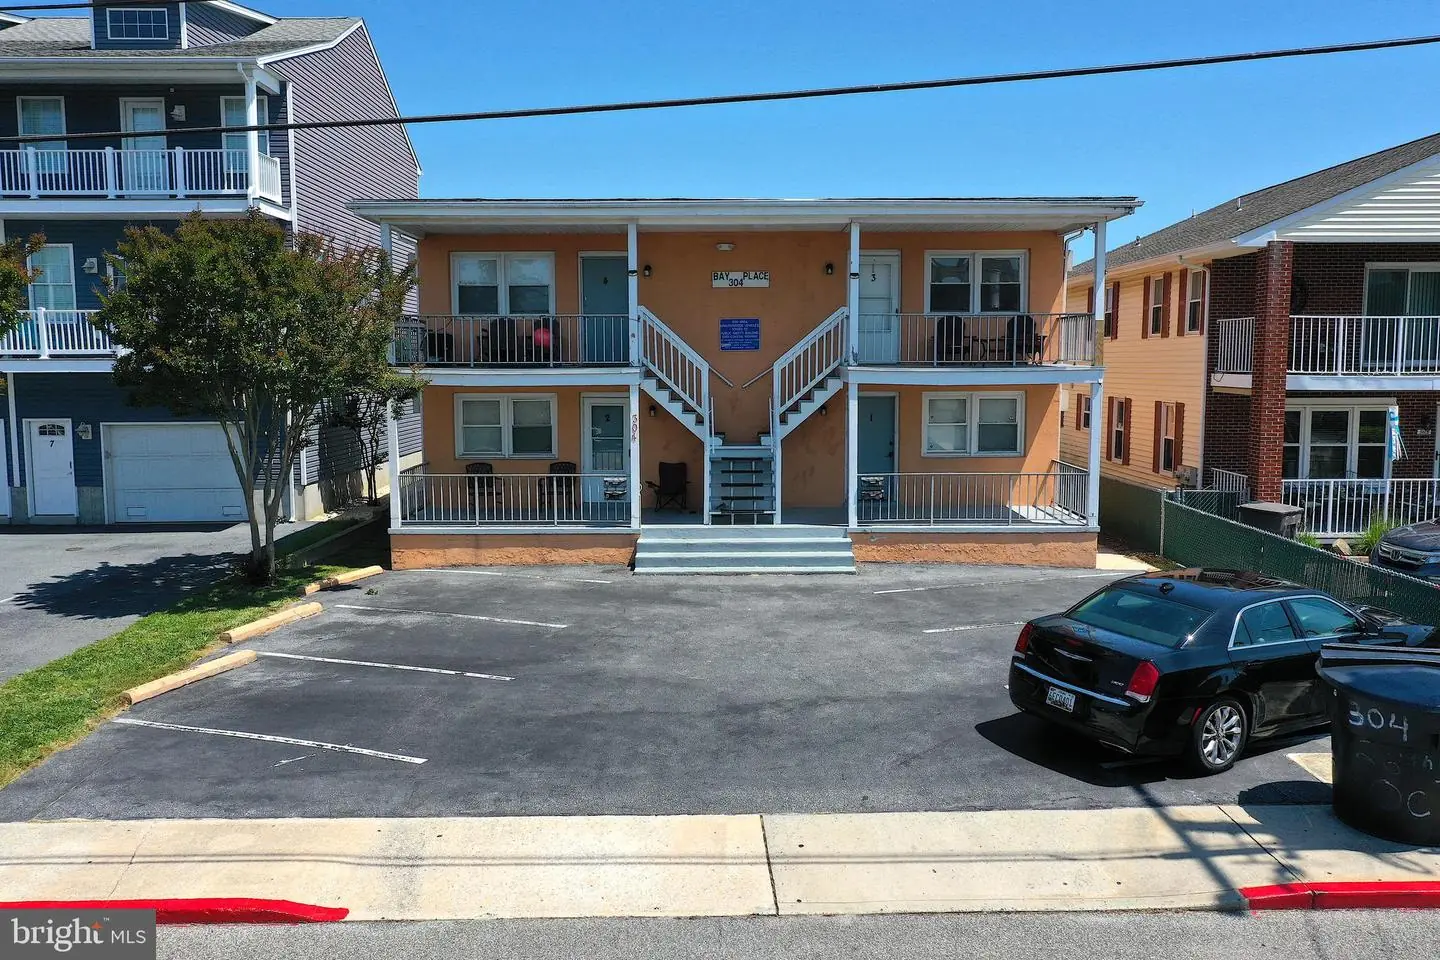 MDWO2014494-802400072890-2023-06-08-12-15-03 304 26th St | Ocean City, MD Real Estate For Sale | MLS# Mdwo2014494  - 1st Choice Properties